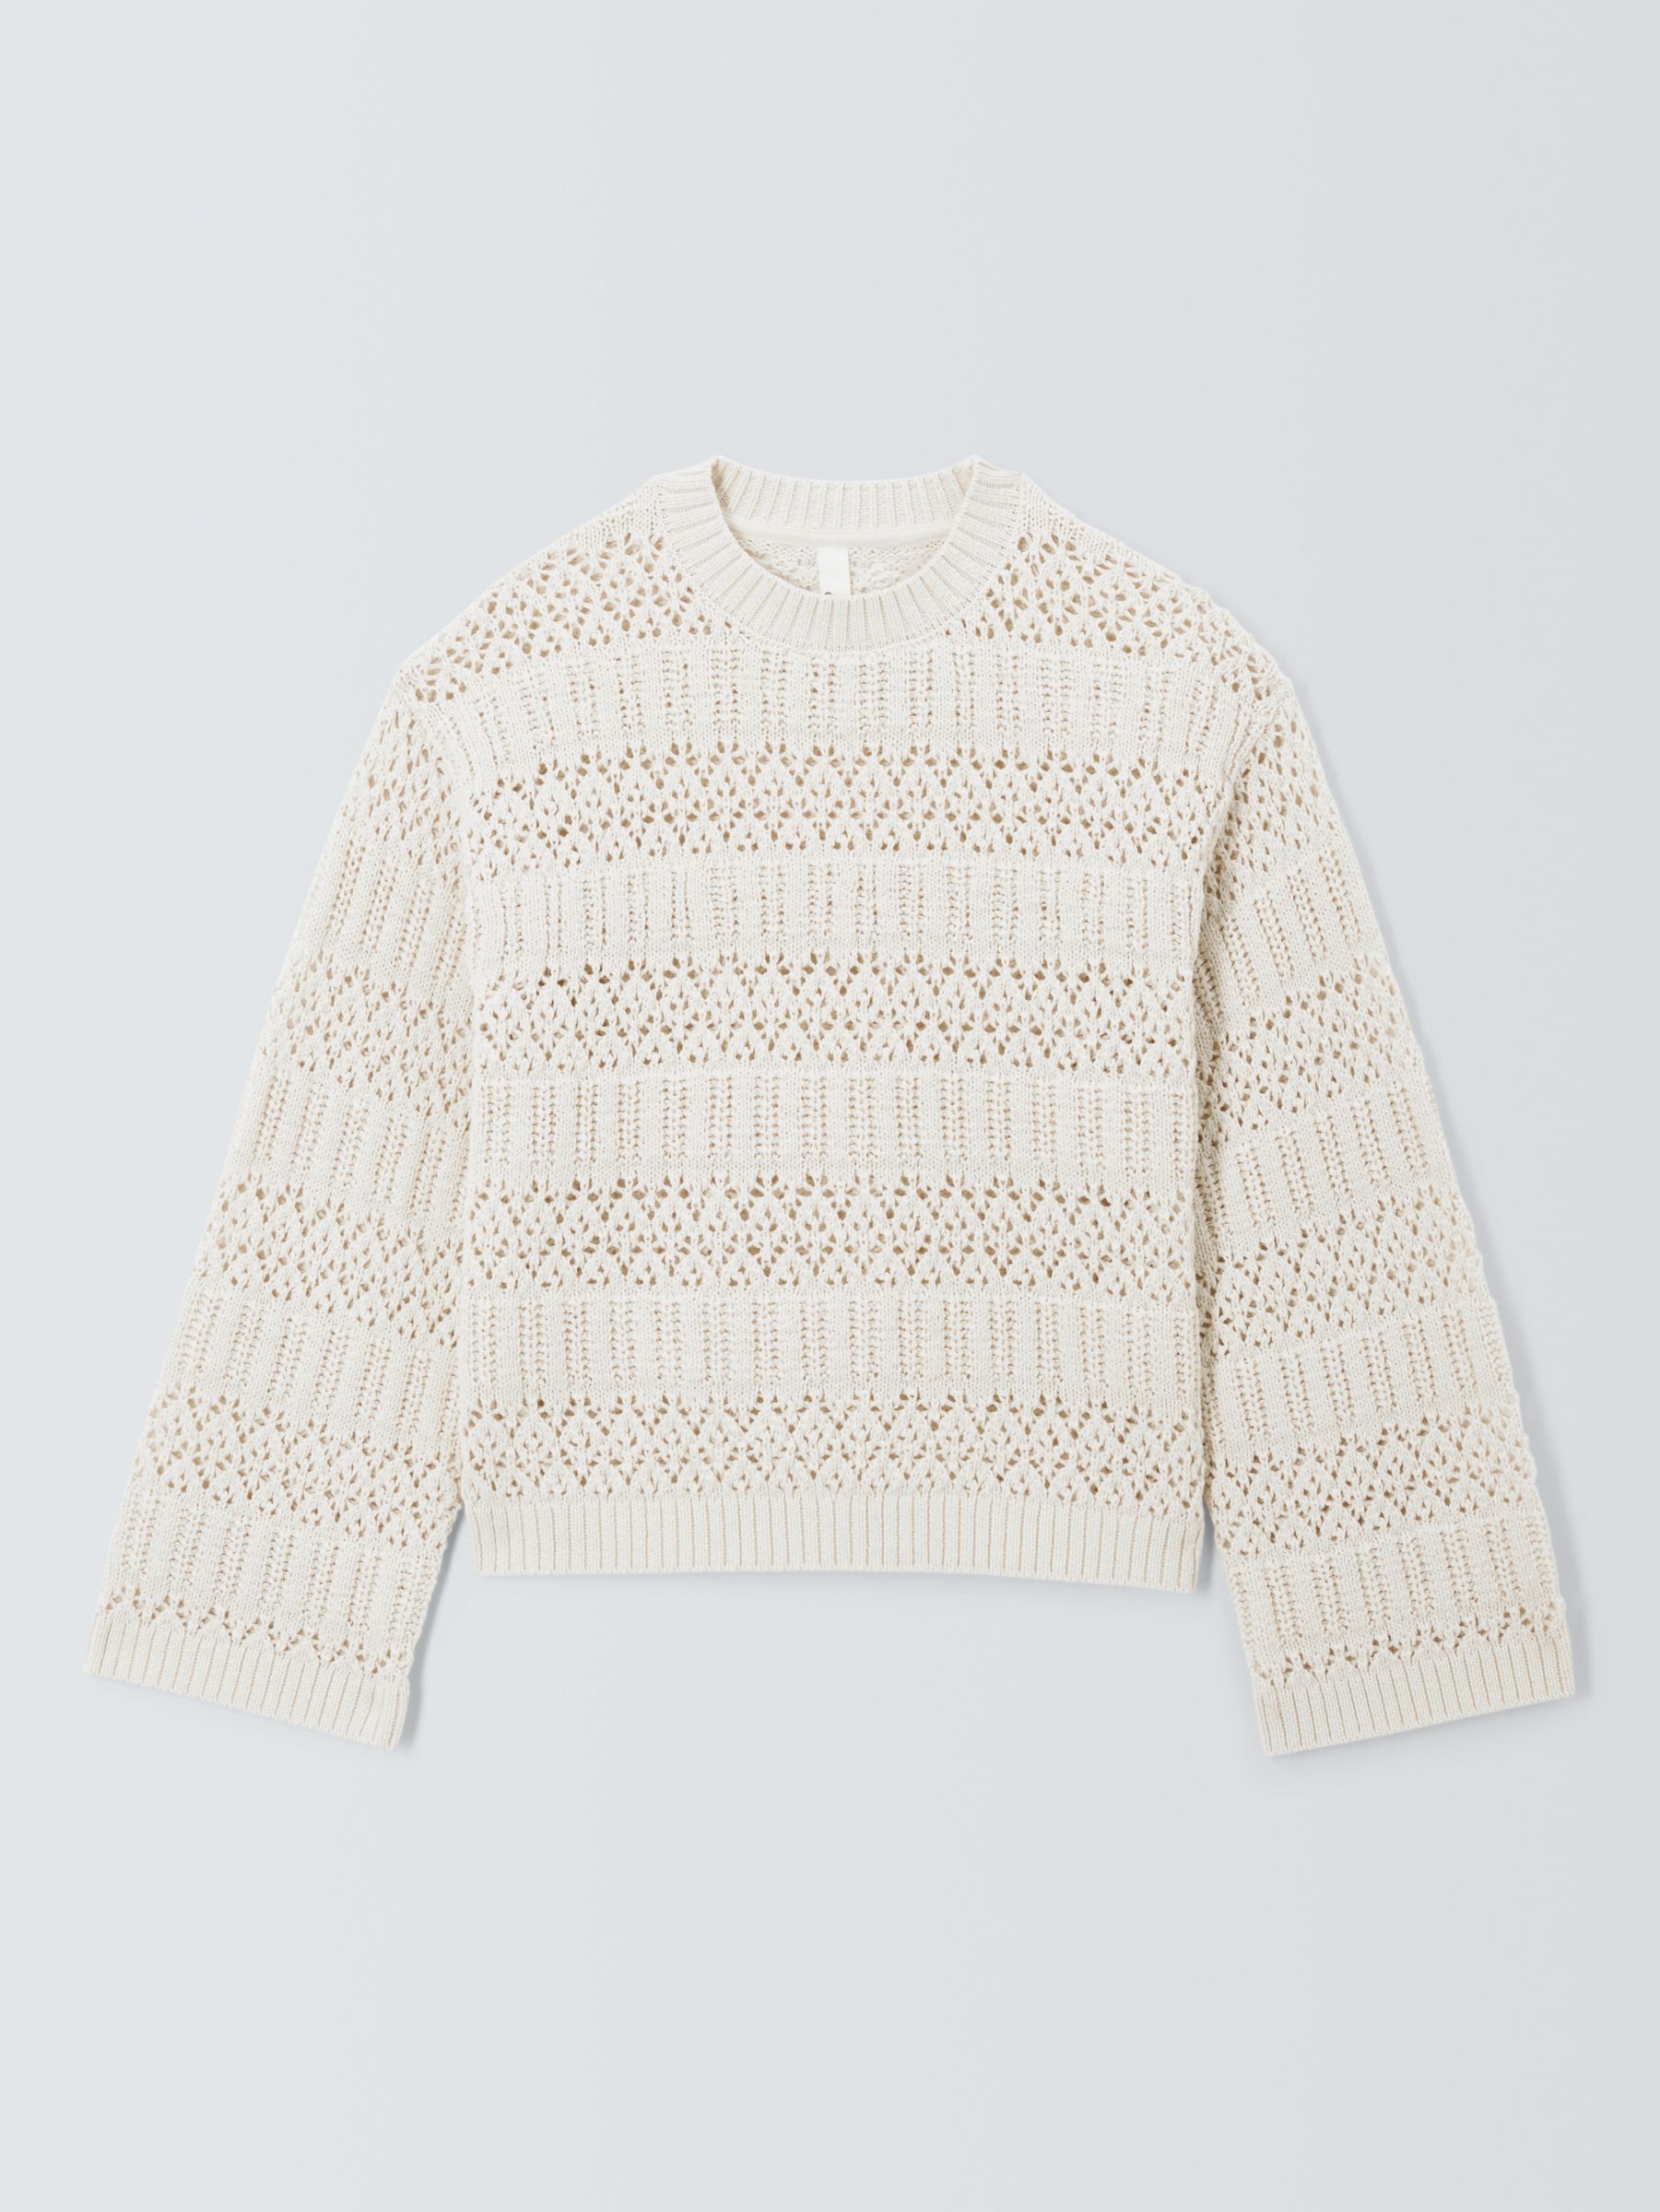 AND/OR Stevie Crochet Jumper, Cream, XS